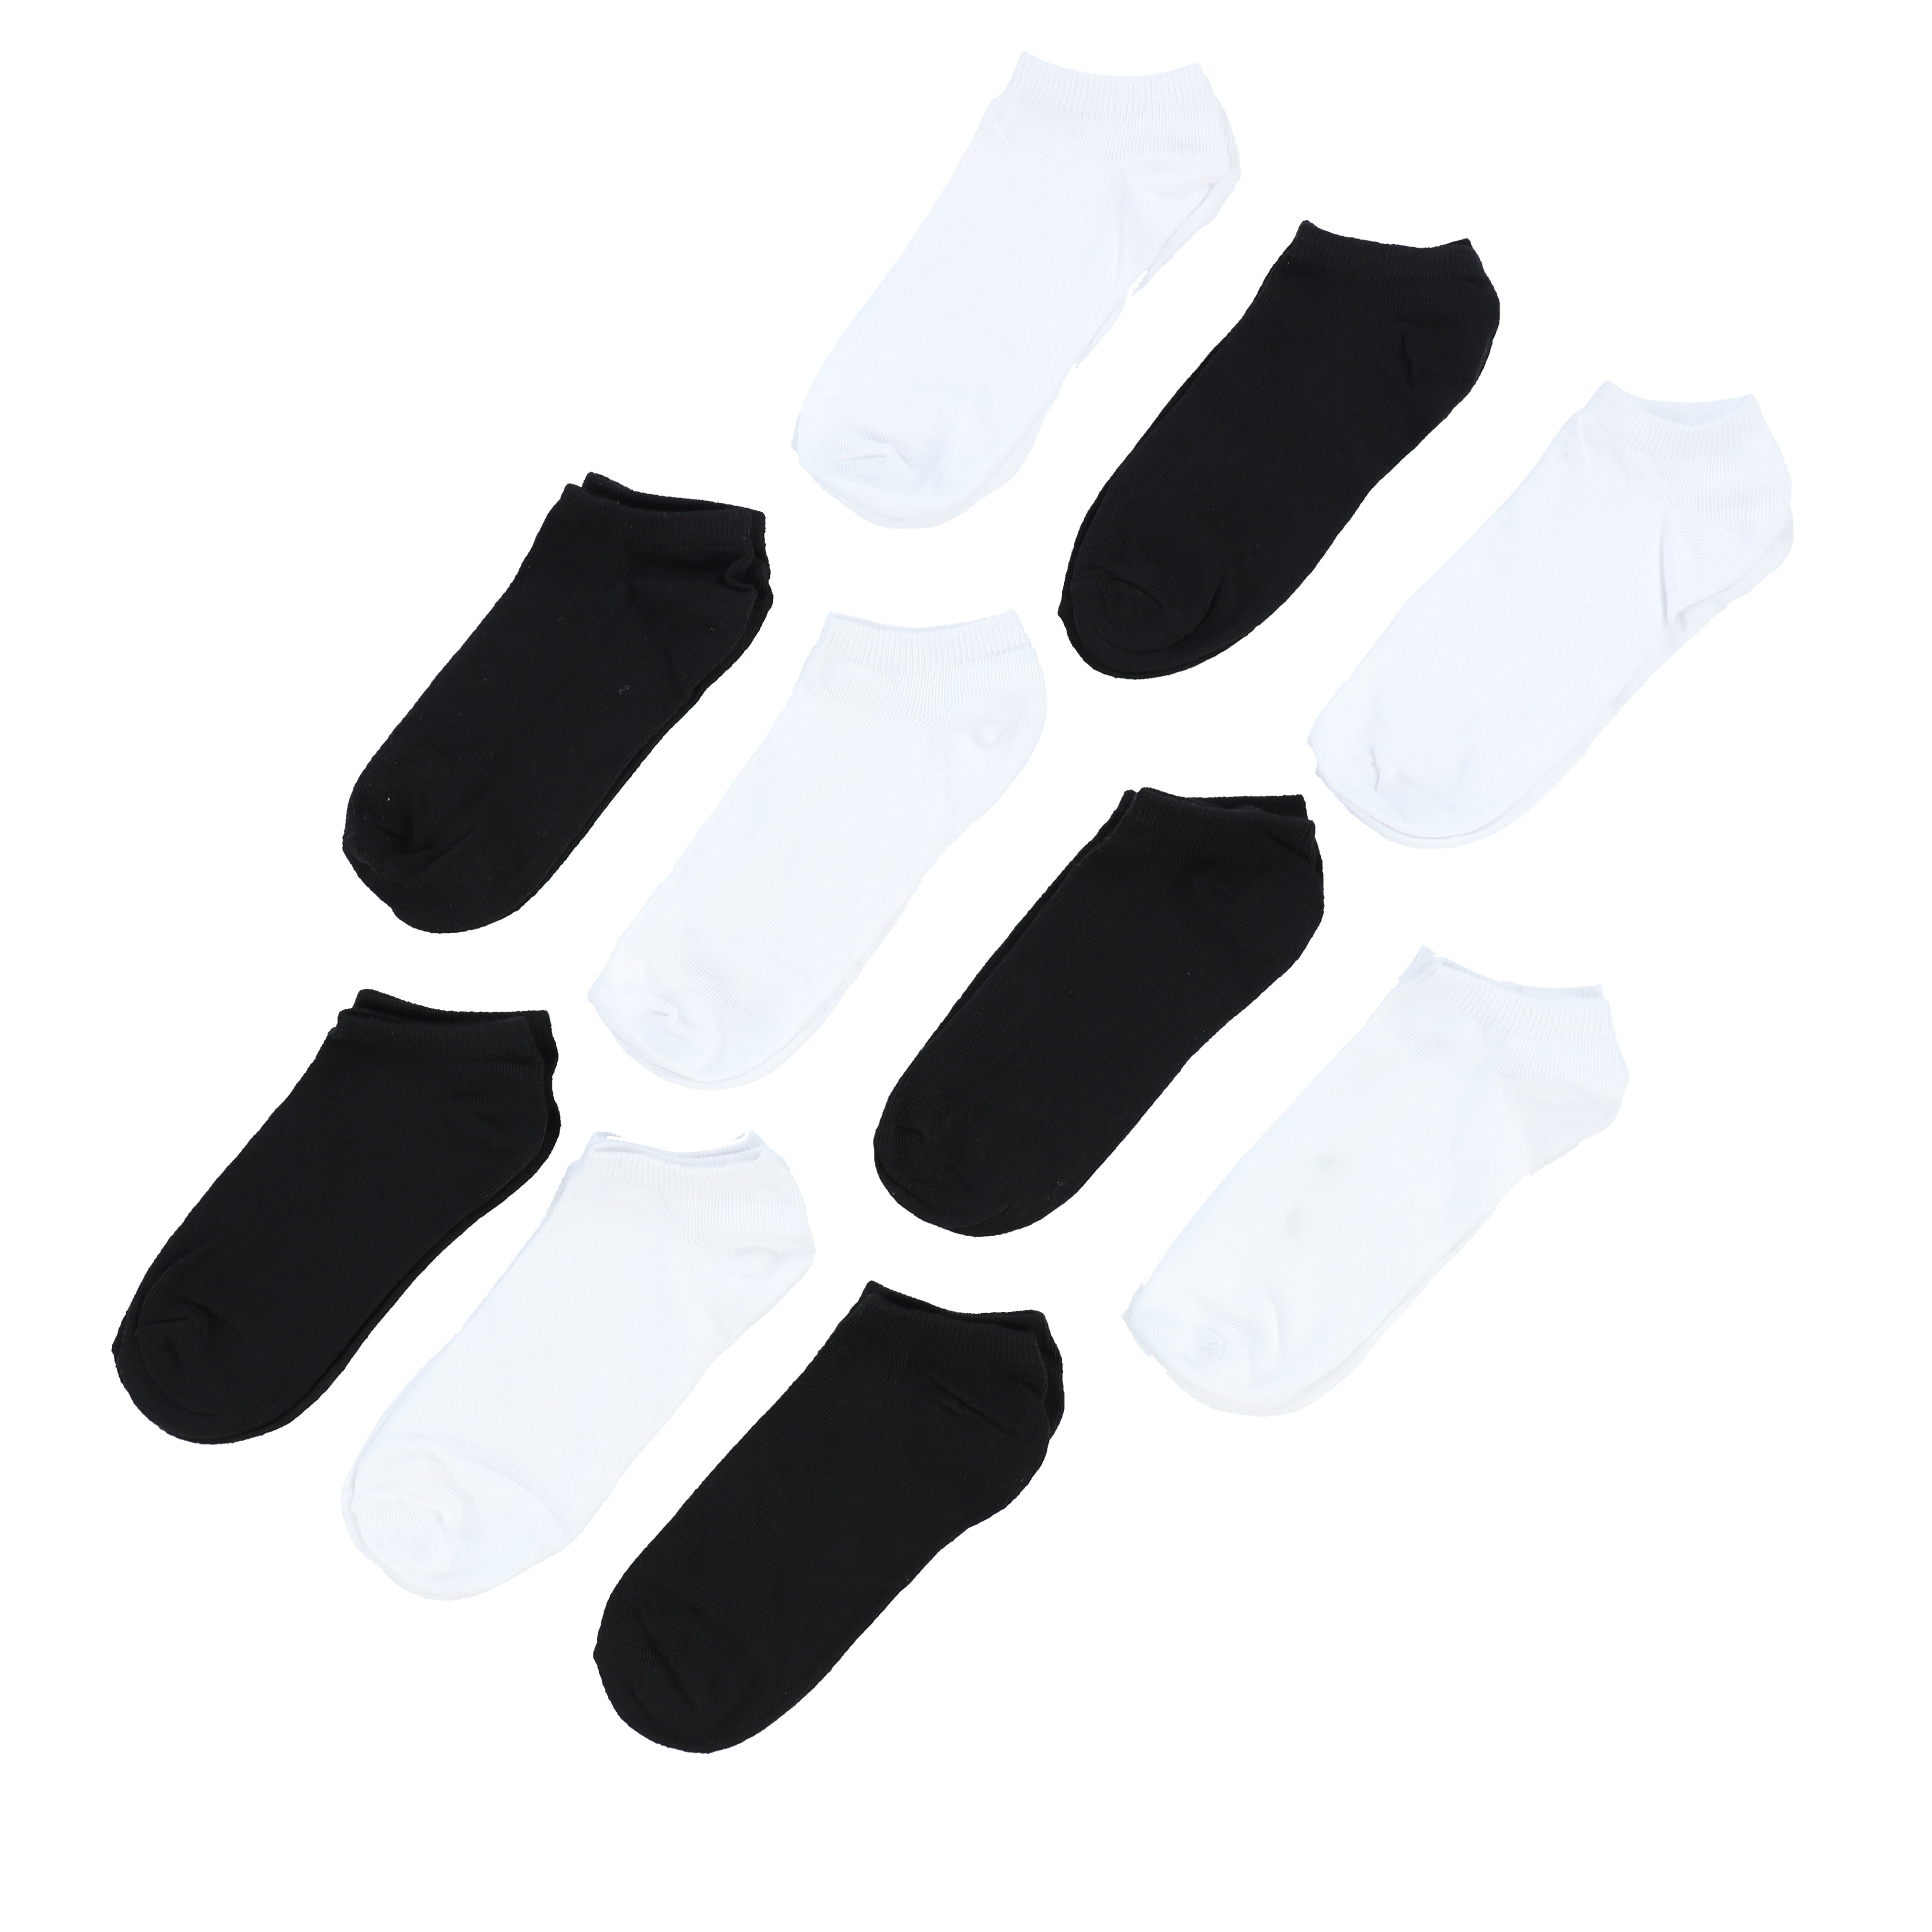 Performance No Show Ankle Socks Size 9-11 10 Pack b.o.c